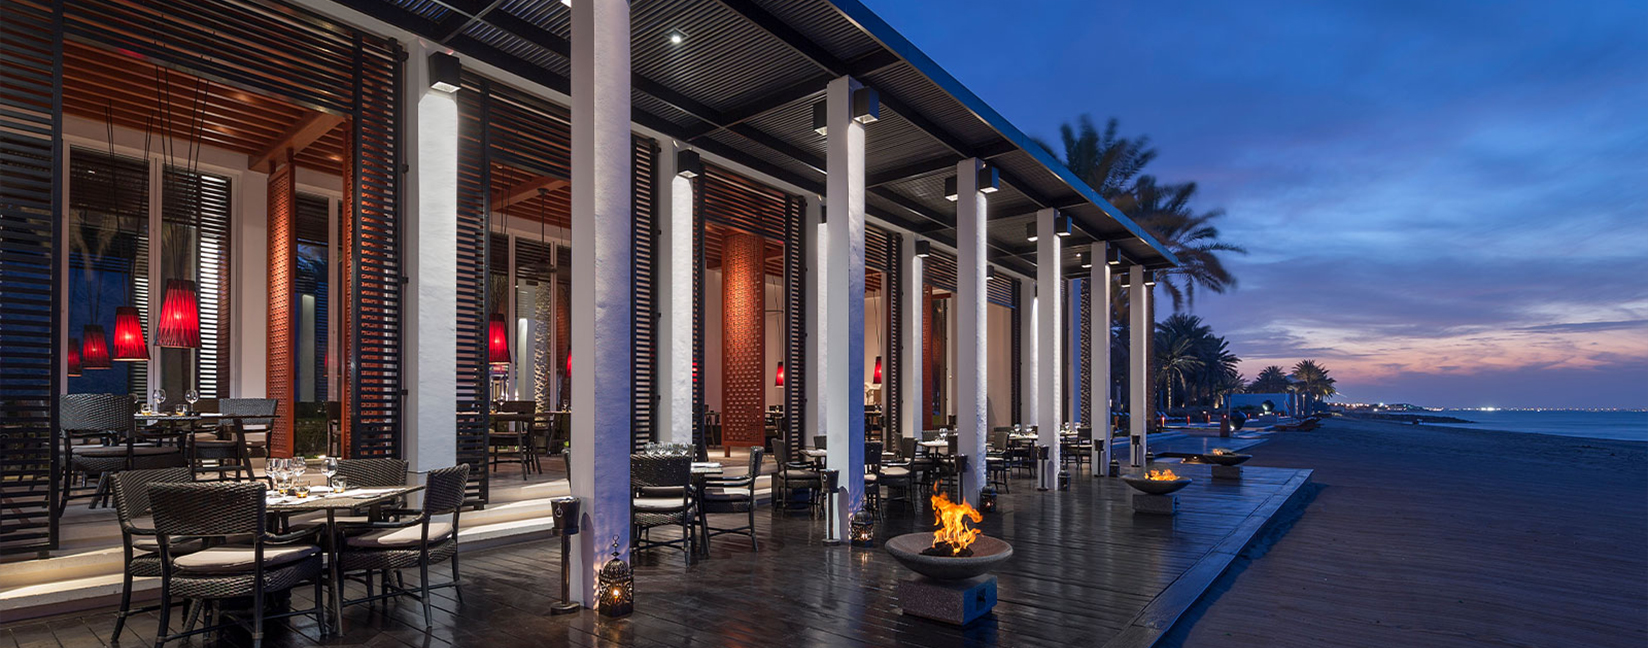 The Chedi Muscat Oman Luxury